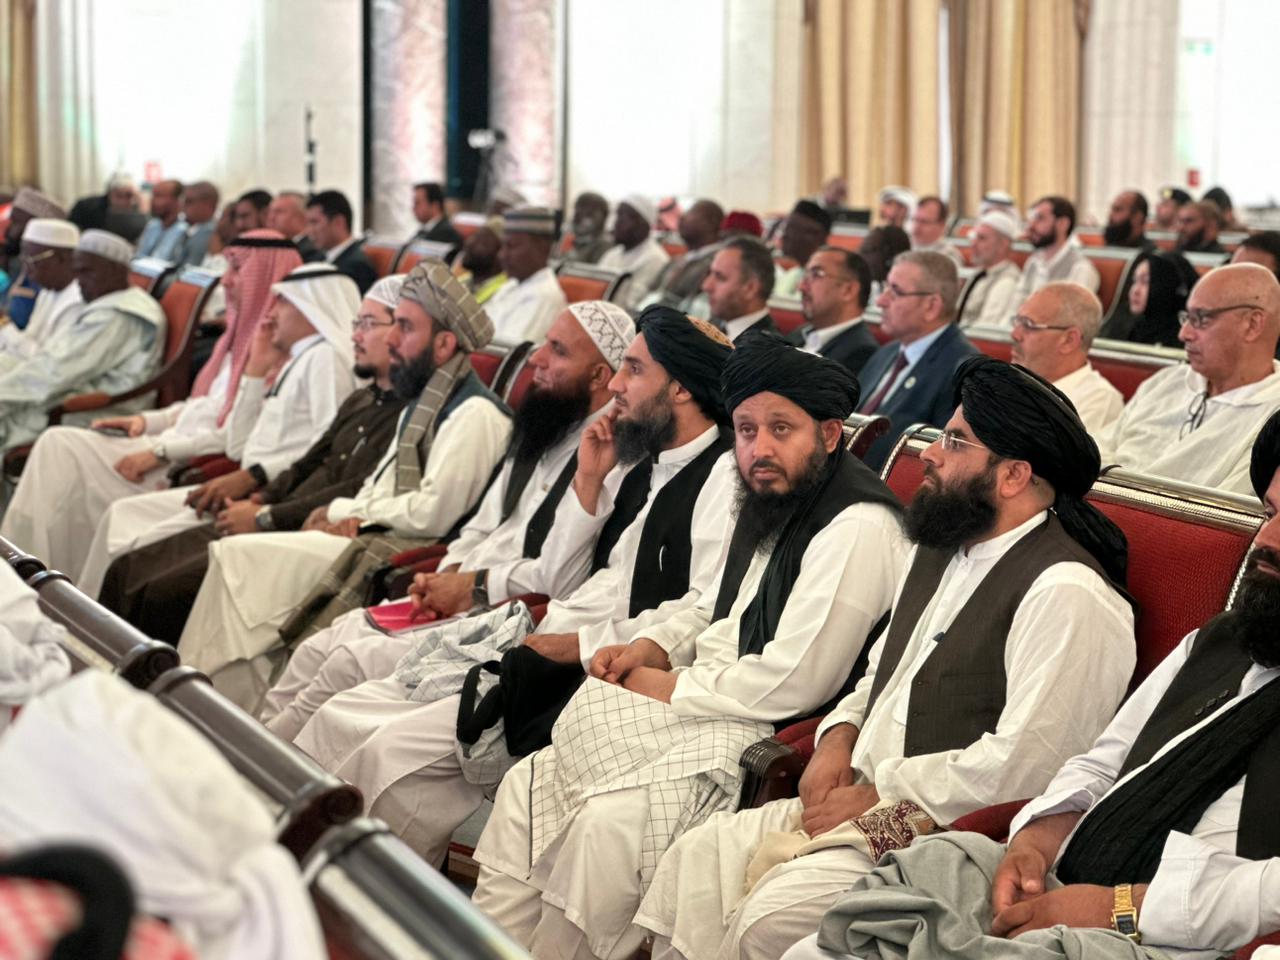 Participation of the Minister of MOHIA in the great Hajj Conference held in Jeddah, Saudi Arabia